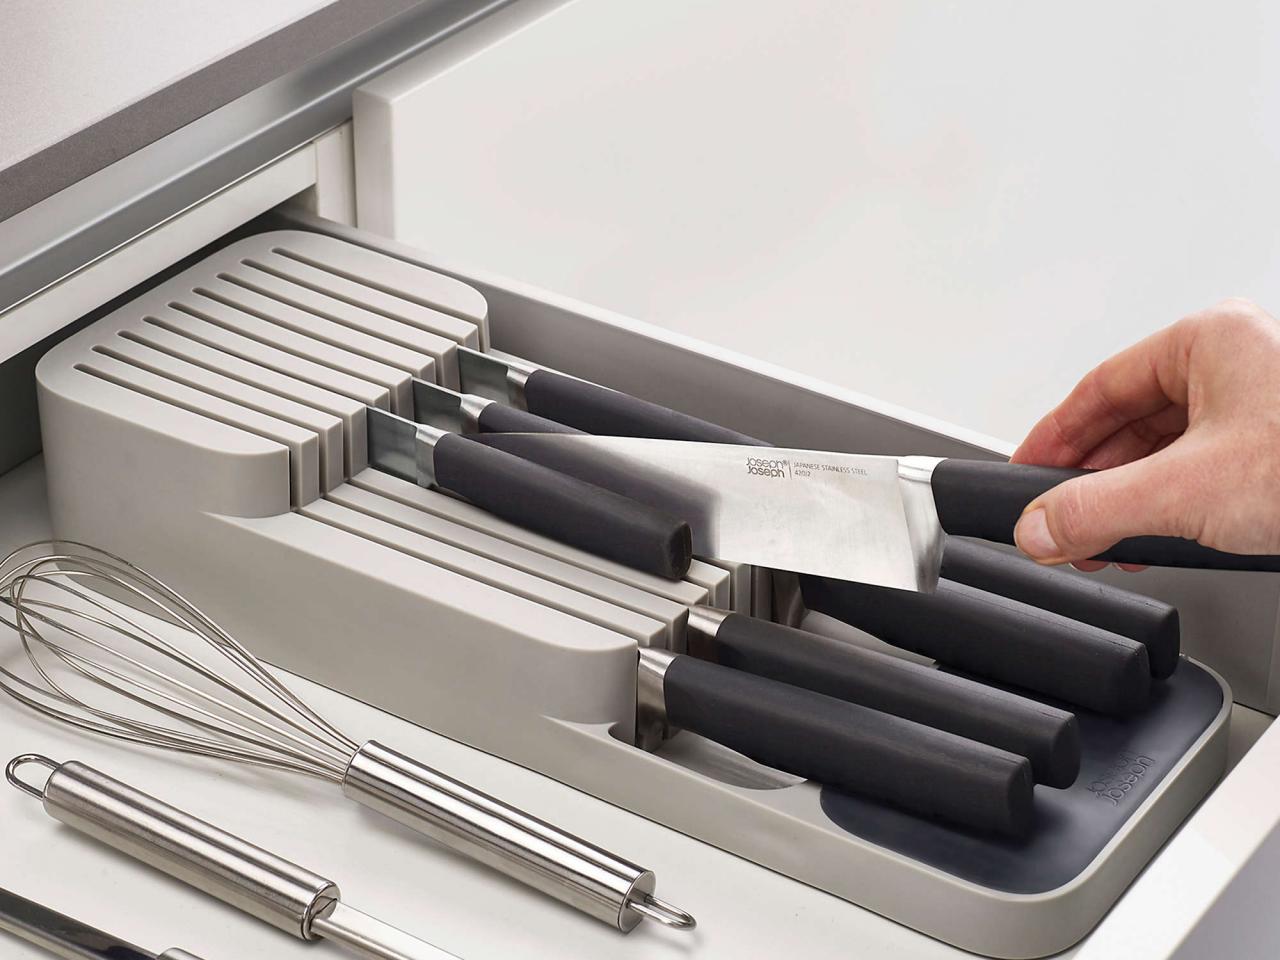 https://food.fnr.sndimg.com/content/dam/images/food/products/2021/1/5/rx_joseph-joseph-drawerstore-2-tier-compact-knife-organizer-in-grey.jpeg.rend.hgtvcom.1280.960.suffix/1609867011775.jpeg